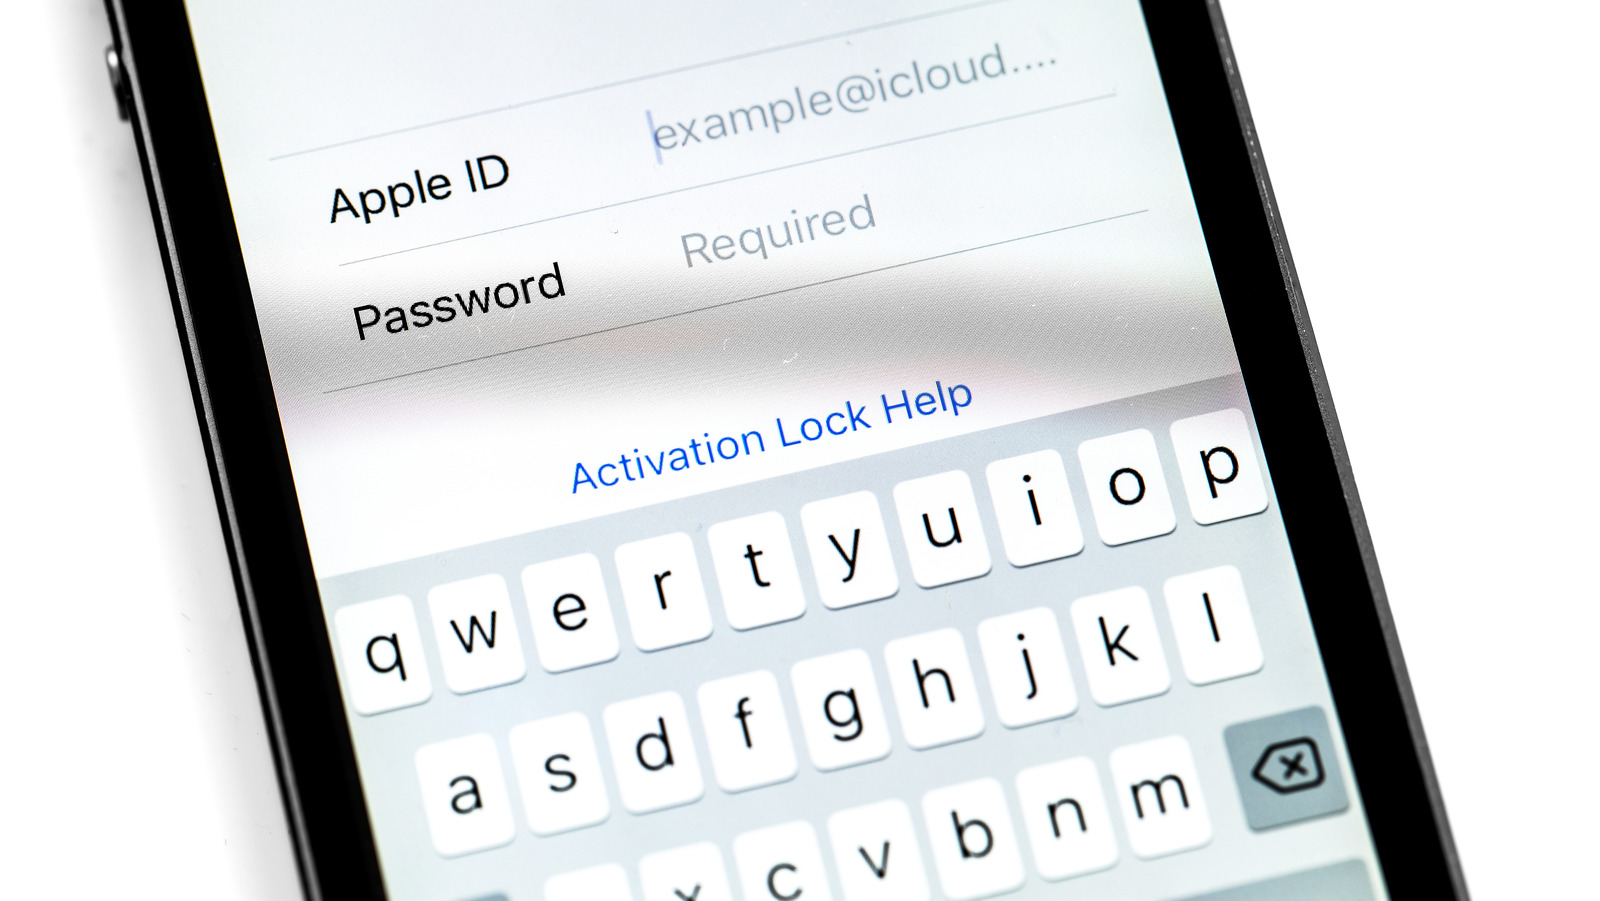 How to Recover iCloud Email Hacked? Take These Steps Immediately